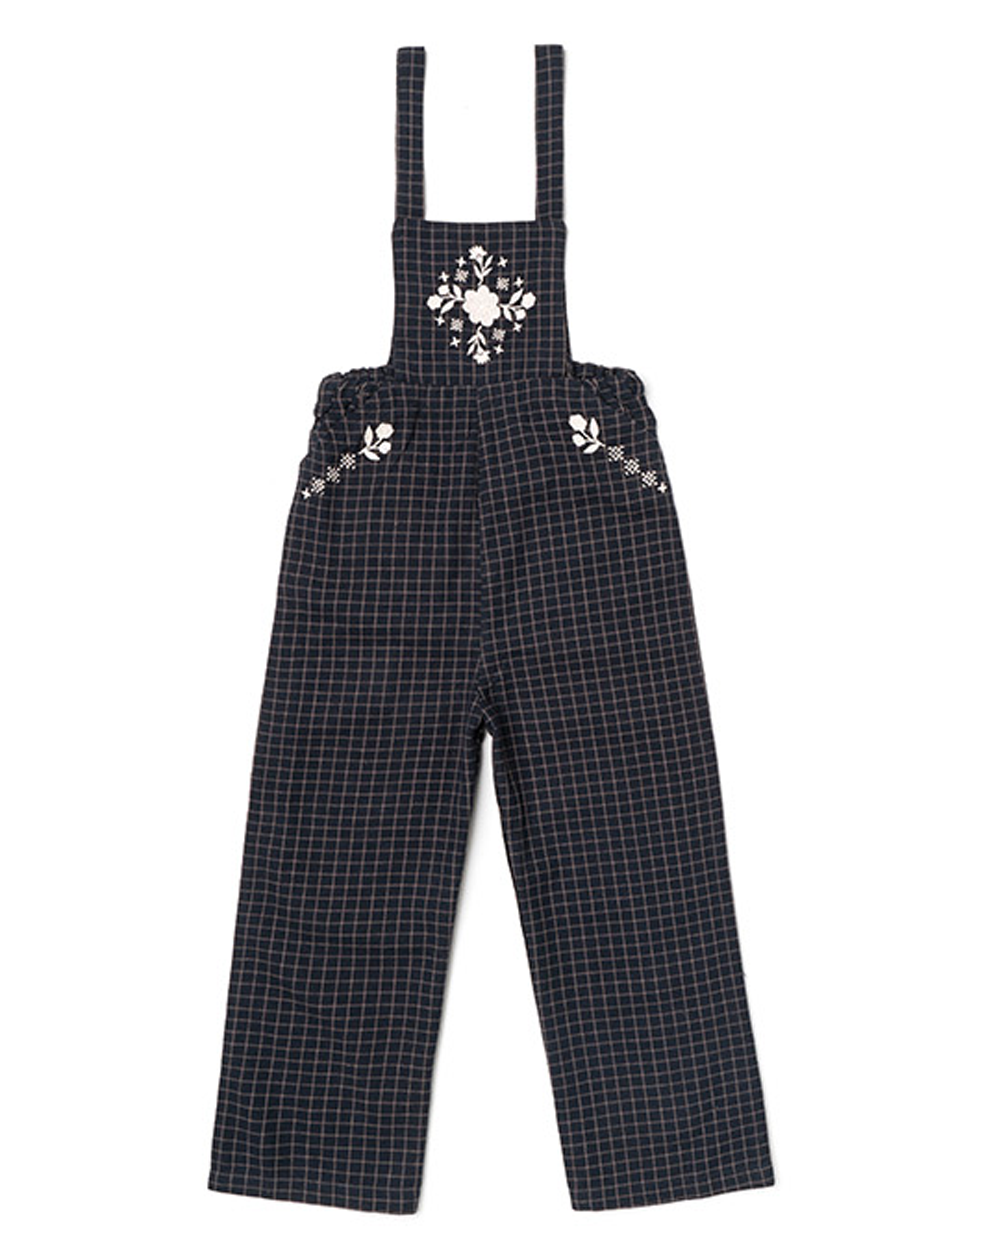 [LALI KIDS]EMBROIDERED OVERALLS/ NAVY YARN DYE [3Y,6Y]